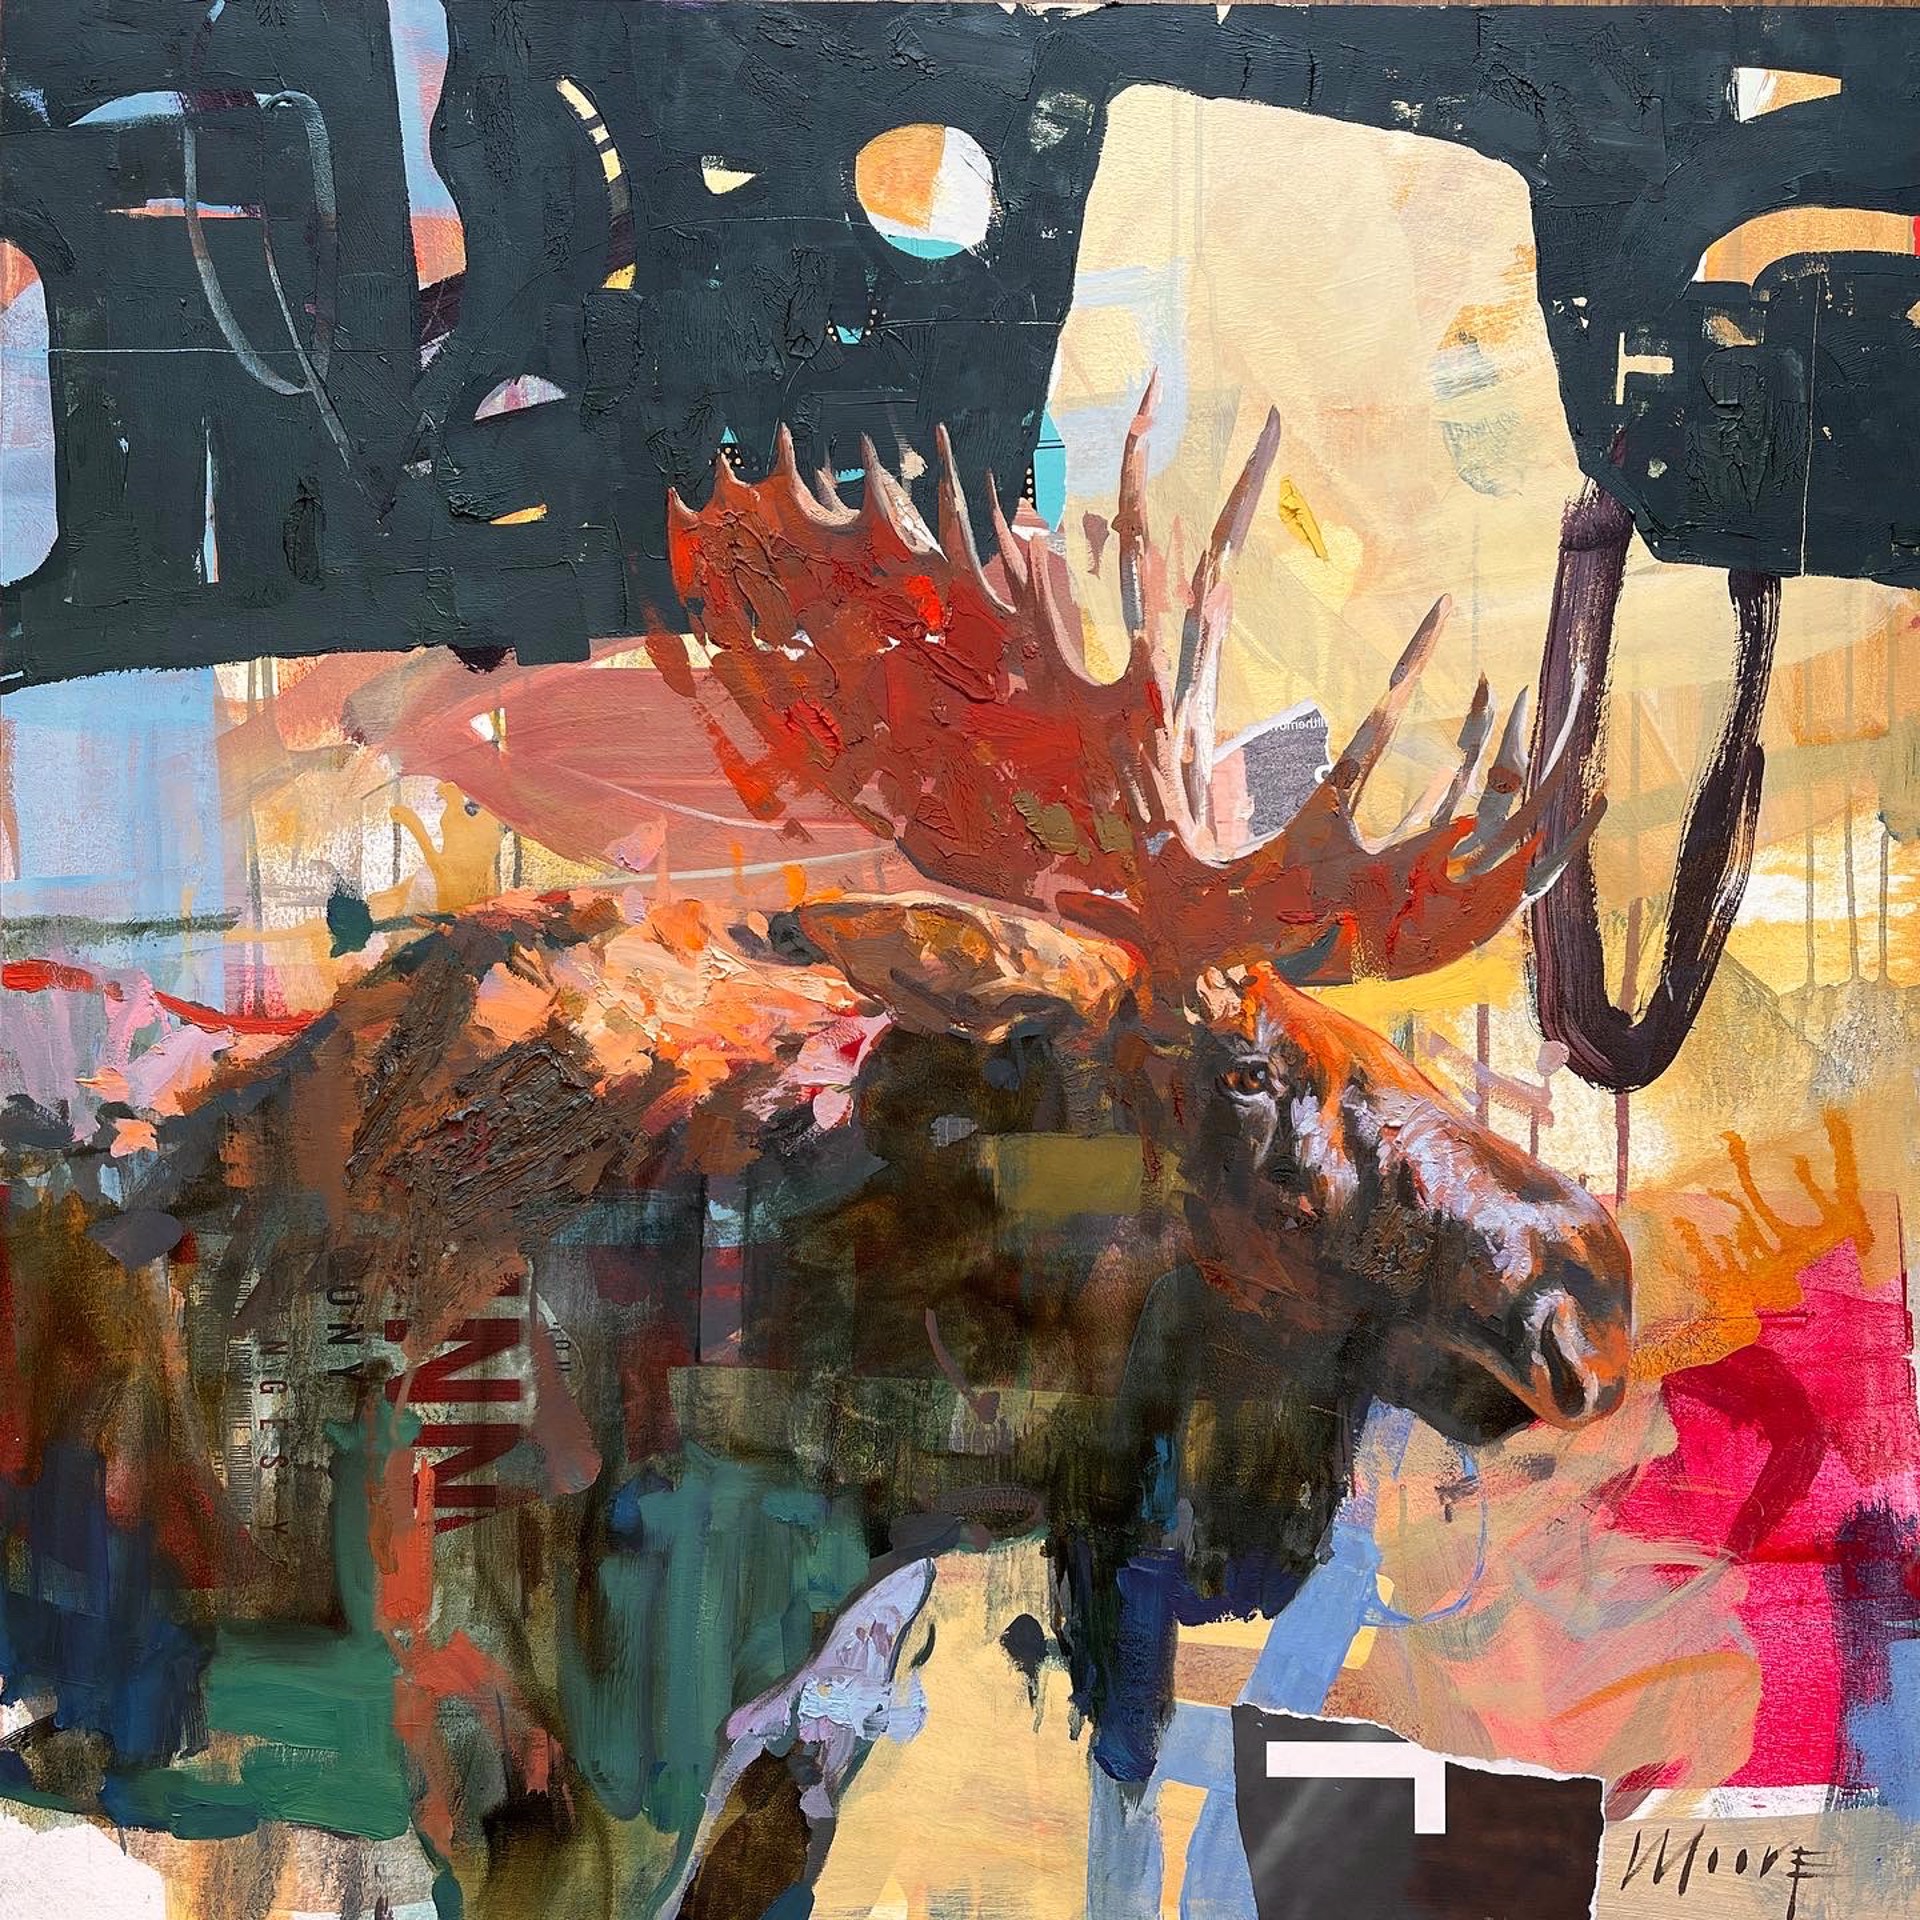 Original Mixed Media Painting Featuring A Moose And Abstract Colorful Background With Collage